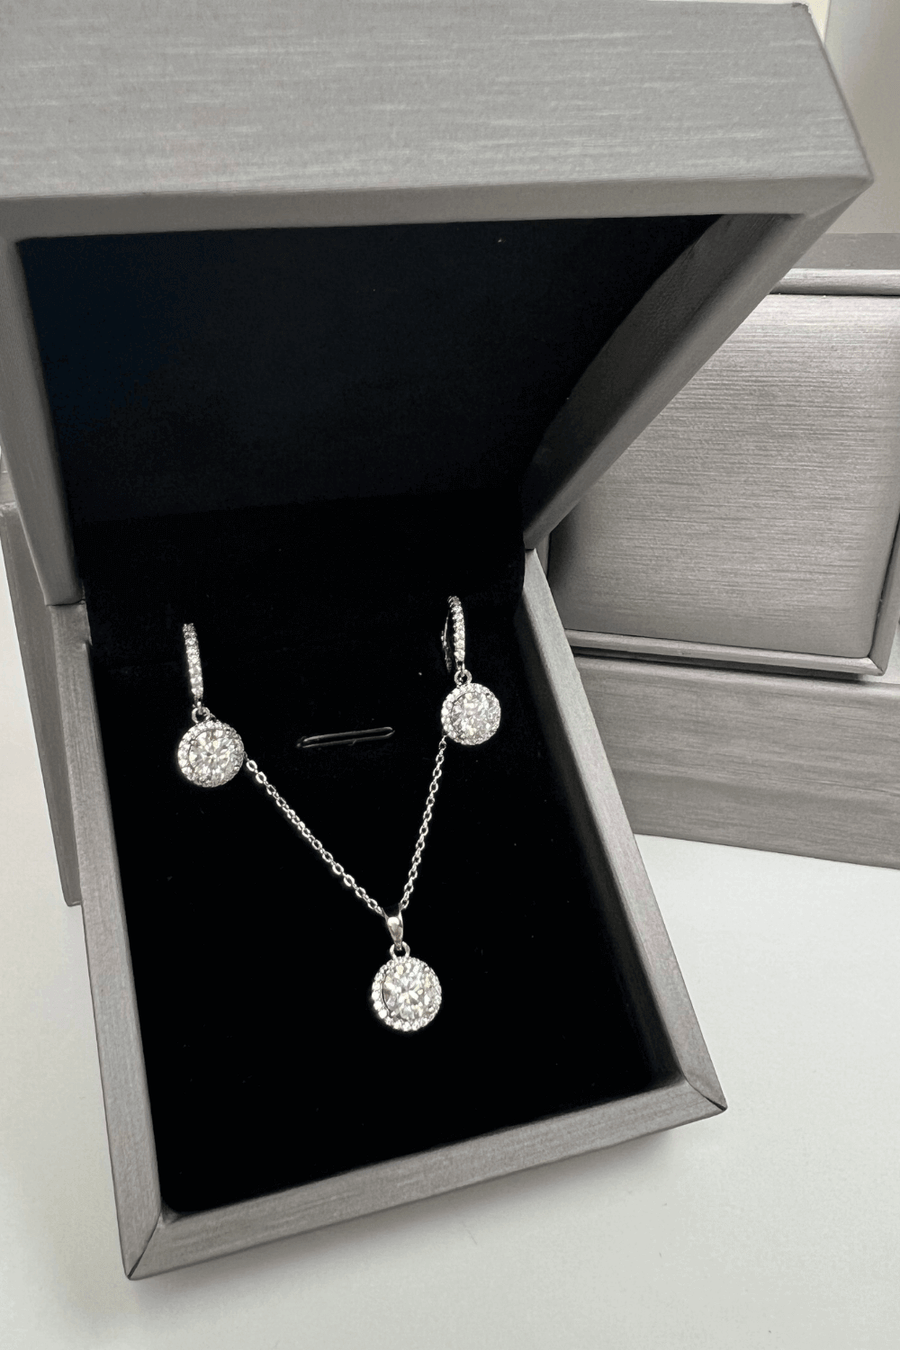 1# BEST Diamond Round Necklace, Earrings Jewelry Bundle Set Gift for Women | #1 Best Most Top Trendy Trending Round Diamond Necklace, Earrings Jewelry Gift for Women, Mother, Wife, Daughter, Ladies | MASON New York